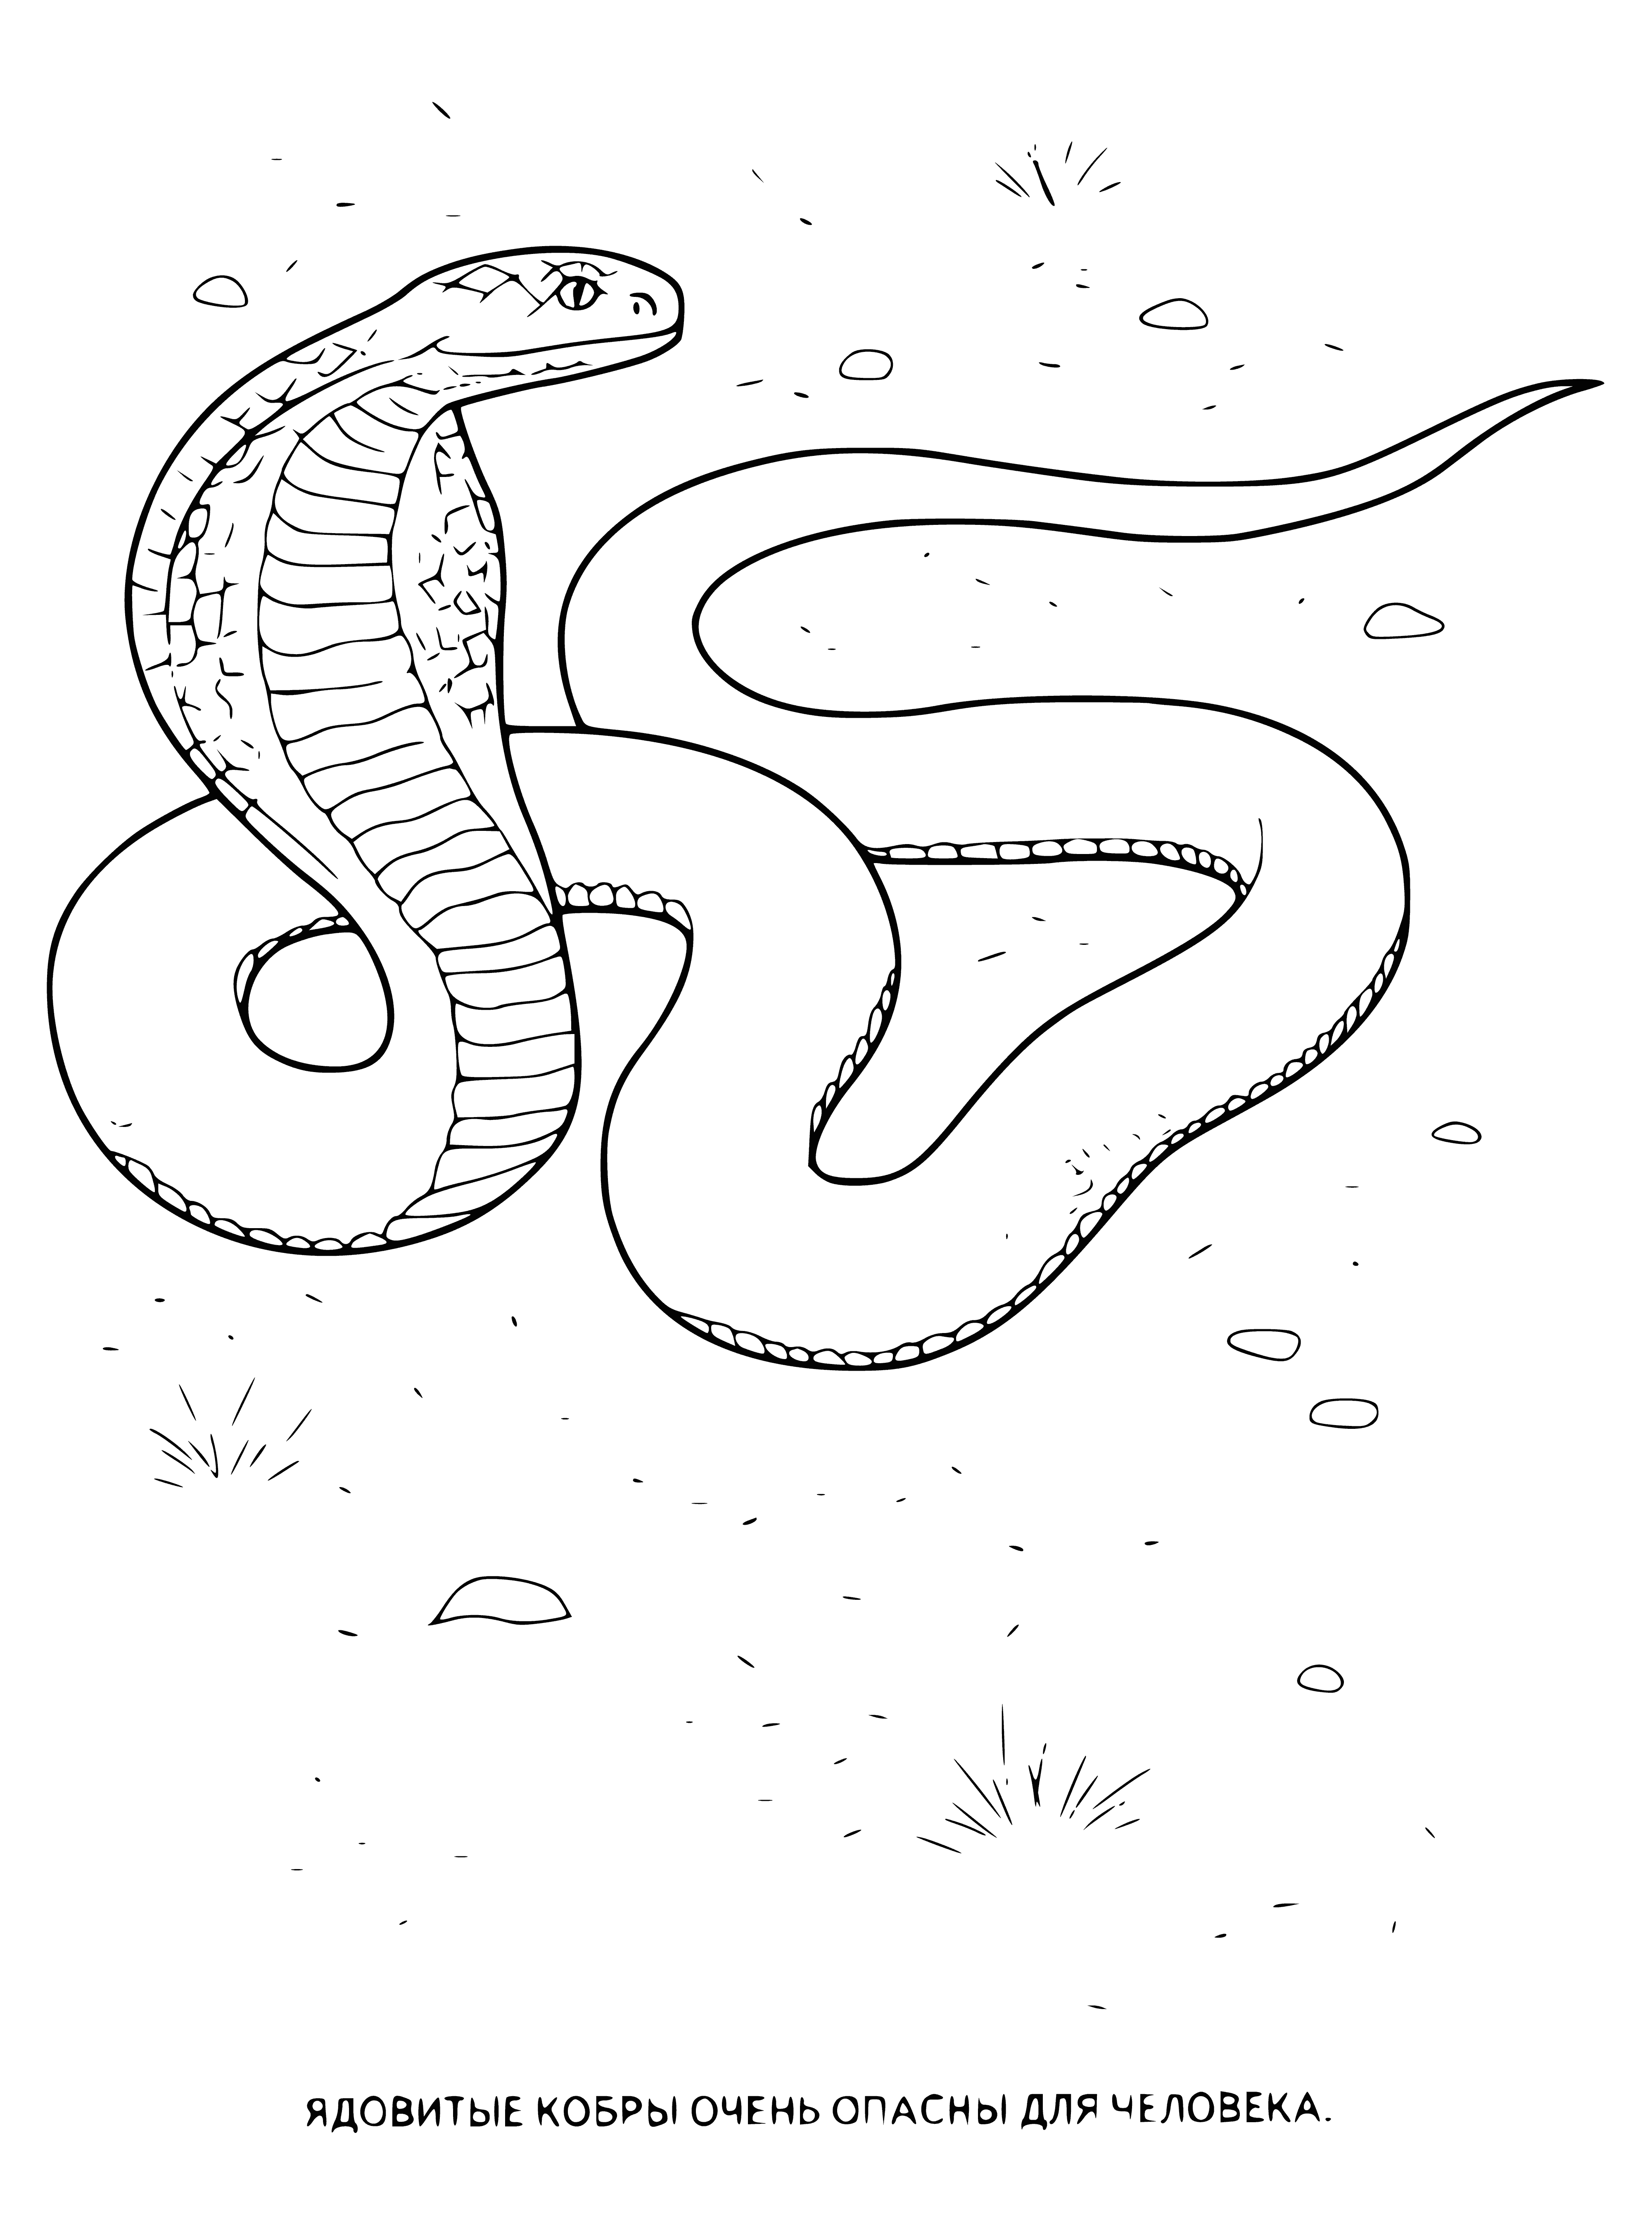 coloring page: A coiled cobra ready to strike with deadly venom, poised and muscular, feared and feared predator, one of the most dangerous animals in the world.